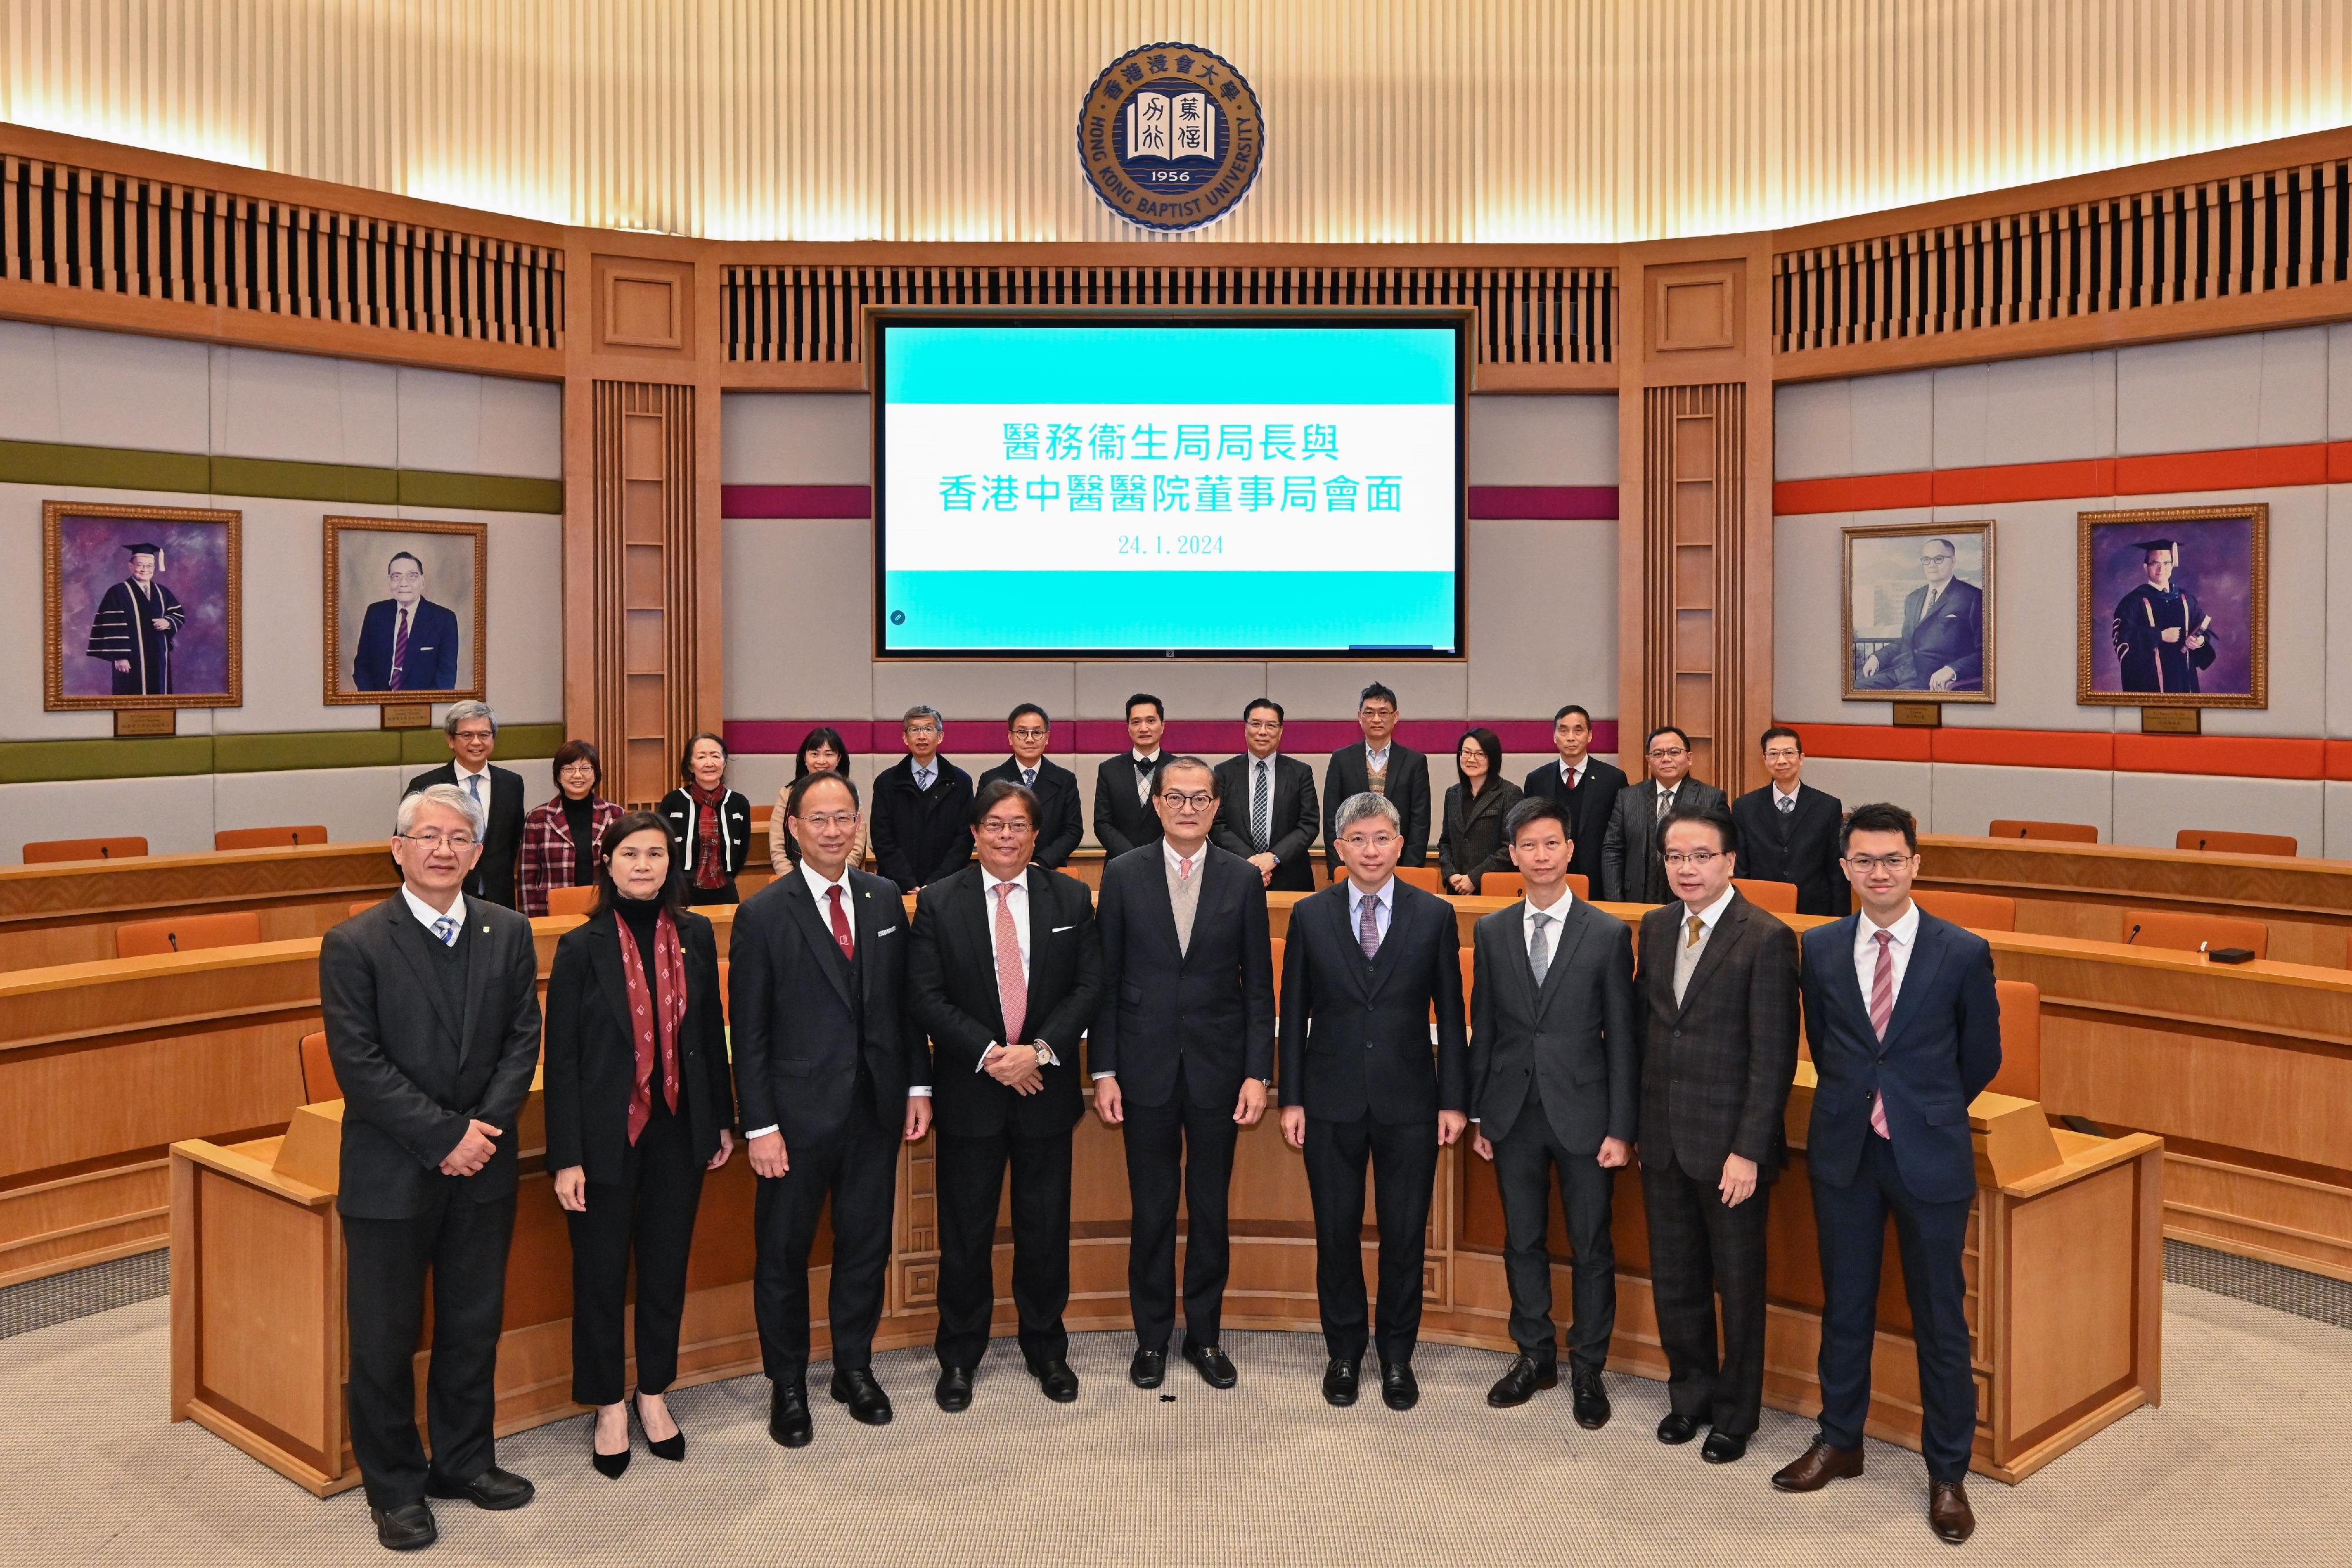 The Secretary for Health, Professor Lo Chung-mau, met with the Board of Directors of the Chinese Medicine Hospital of Hong Kong (CMH) today (January 24) to receive a briefing on the preparatory work for the CMH’s commissioning. Photo shows Professor Lo (front row, centre); the Permanent Secretary for Health, Mr Thomas Chan (front row, fourth right); the Chairman of the Board of Directors of the CMH, Mr Huen Wong (front row, fourth left), and other attendees of the meeting.